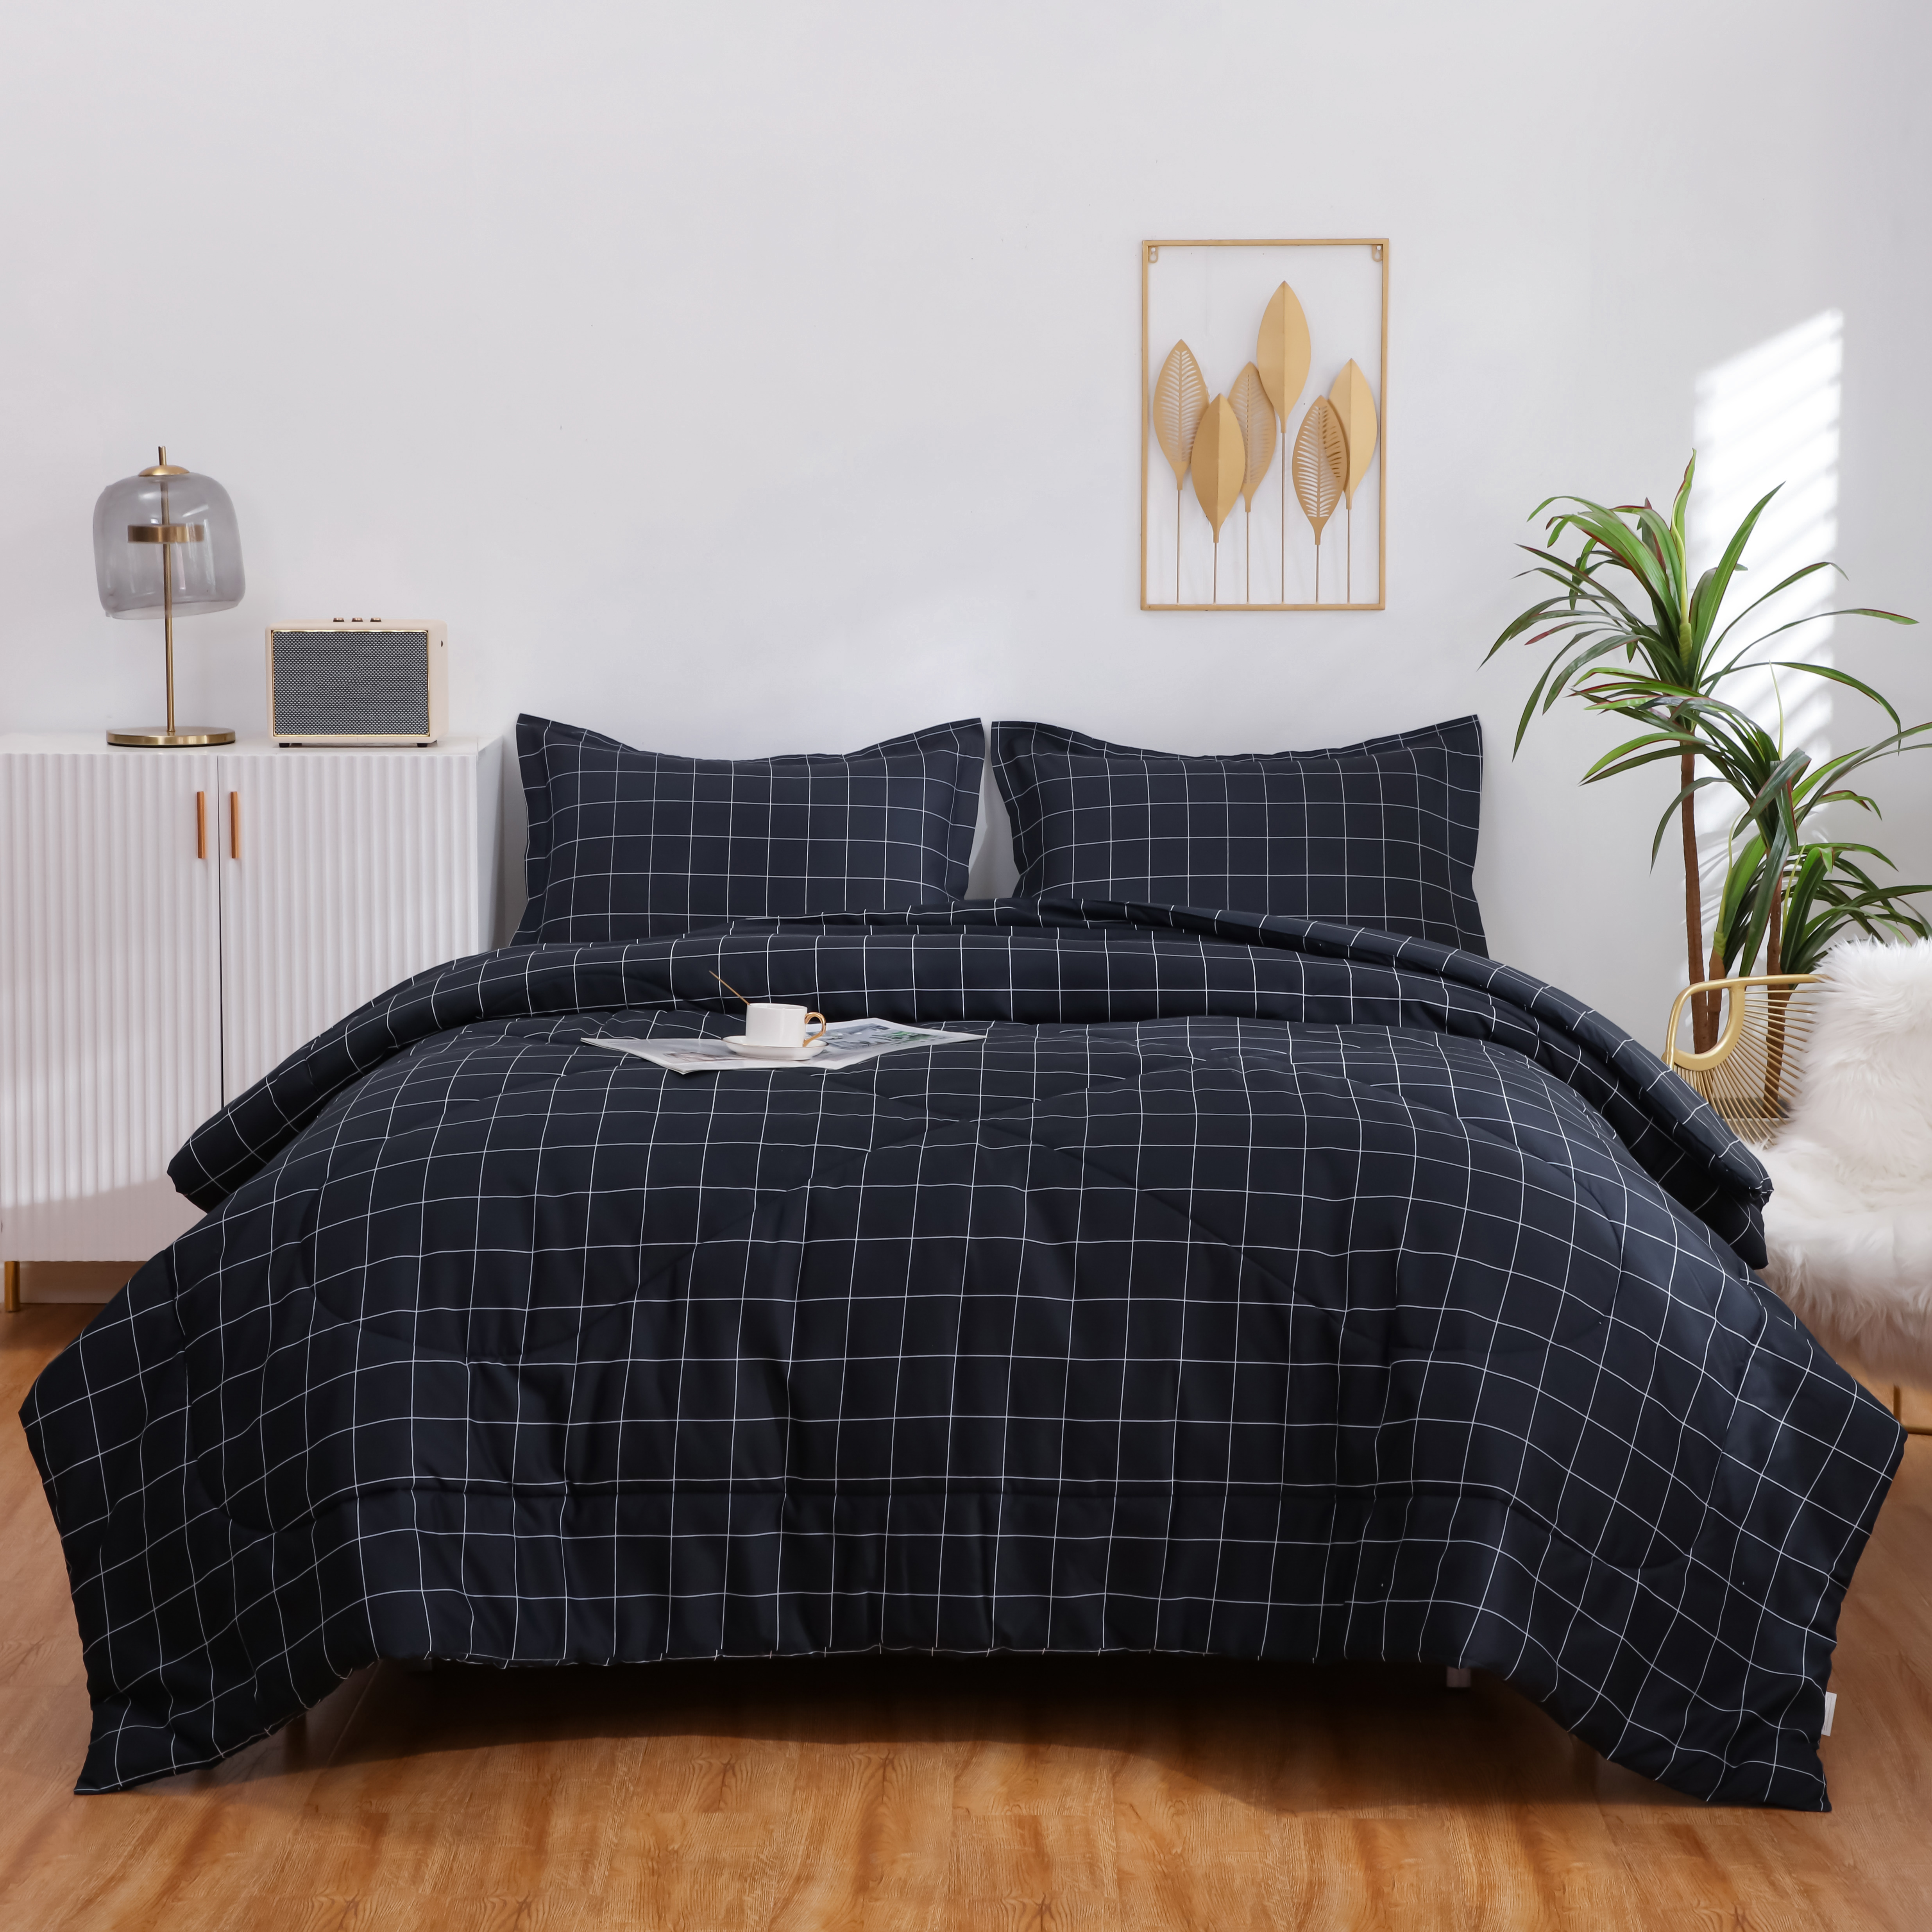 LUCKYBULL Navy Grid Comforter Set 3 Pieces Full Bedding Set Fluffy Down Alternative Navy Grid Comforter with White Lines, Grid Soft Textured Comforter with 2 Pillowcases All Seasons